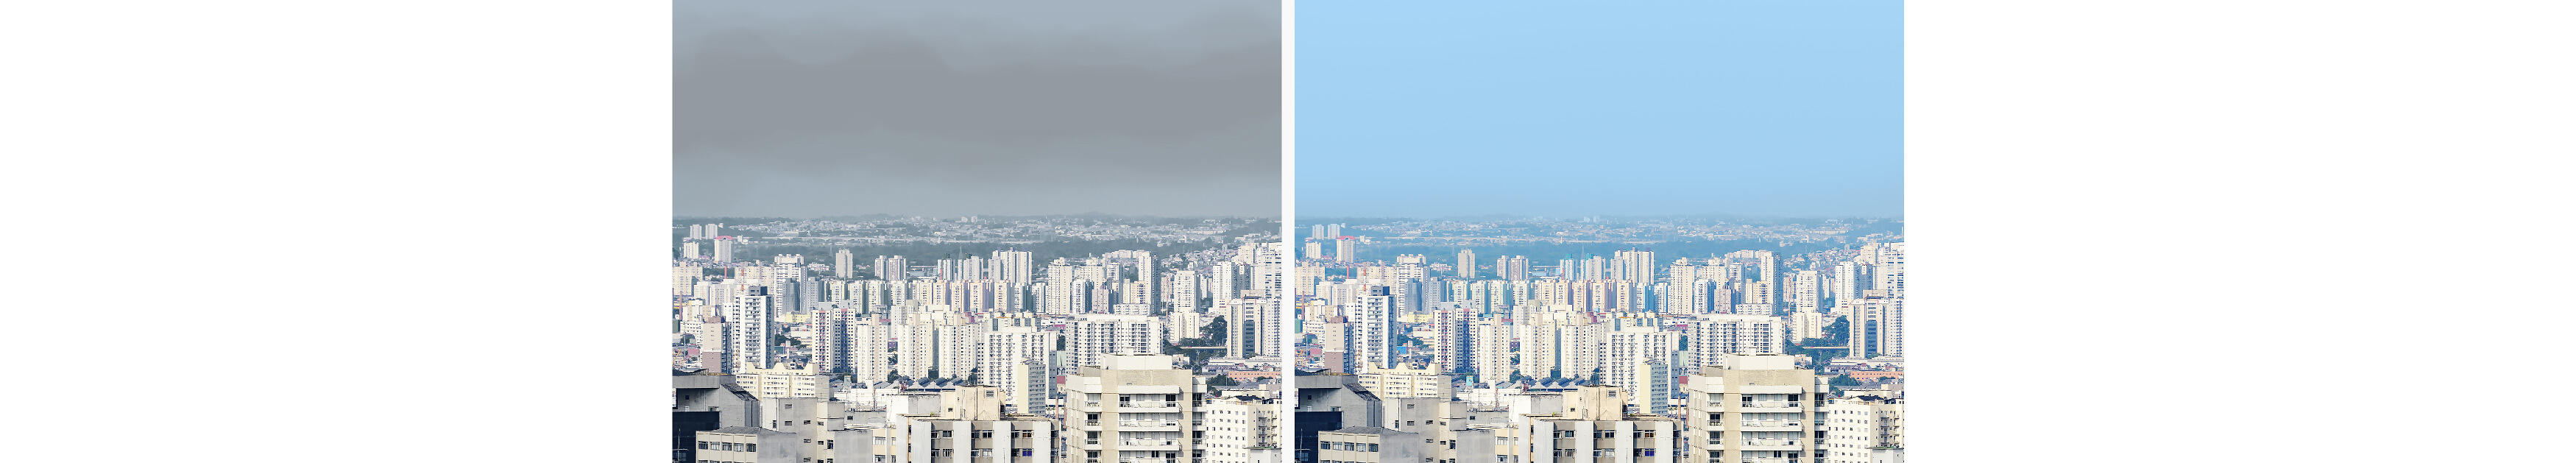 Images of Sao Paulo showing comparison of pollution in 2019/2020